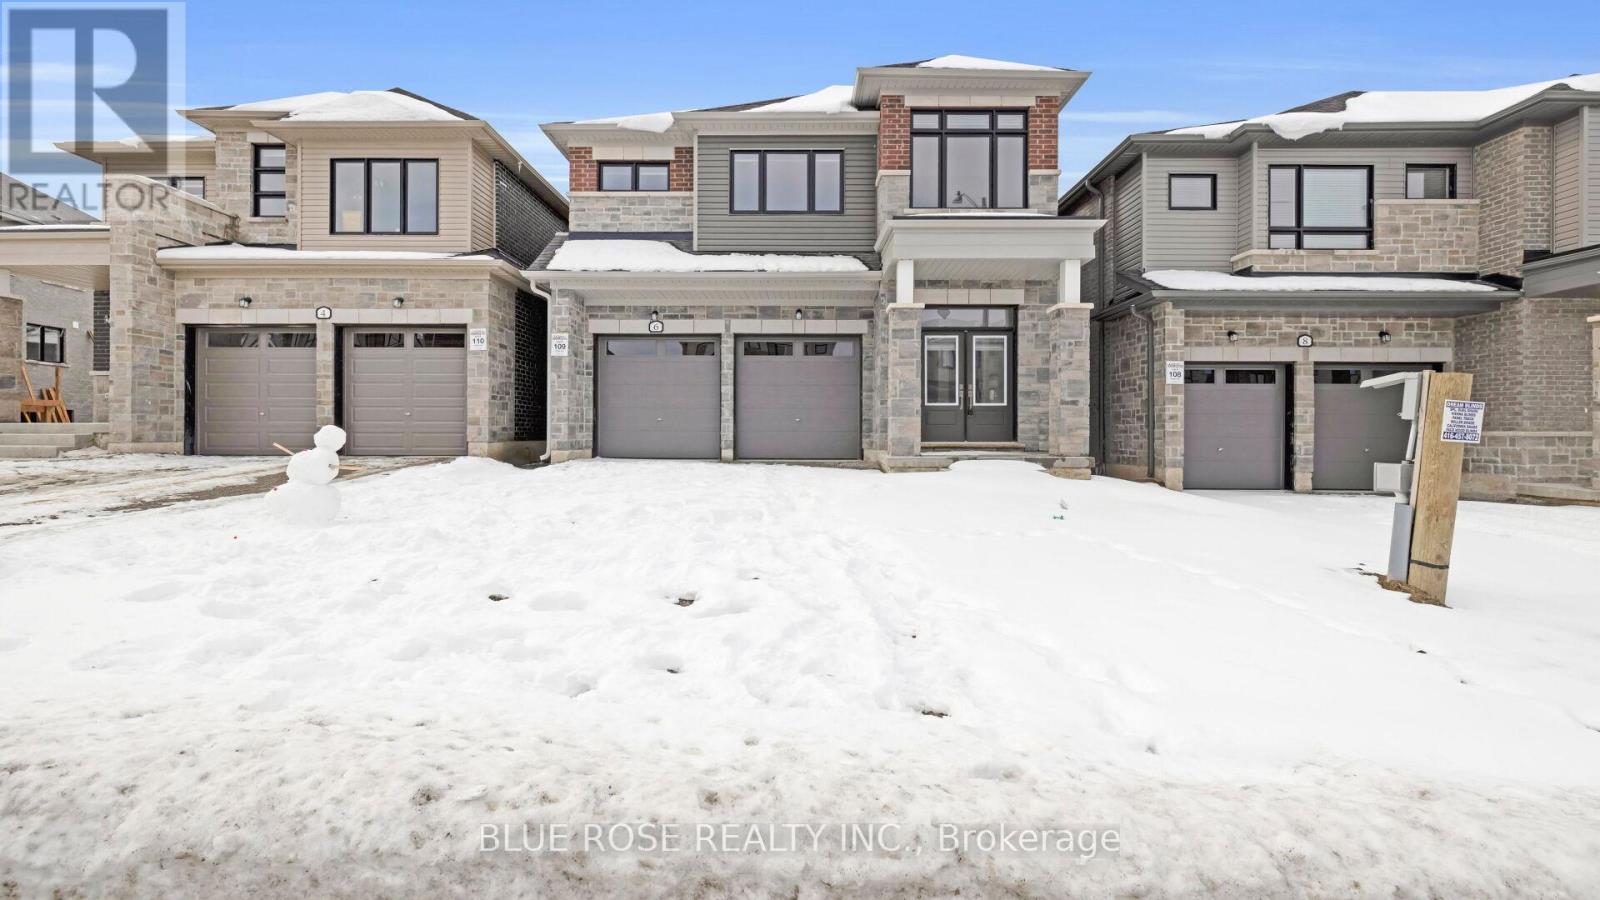 6 ABBEY CRESCENT, barrie, Ontario